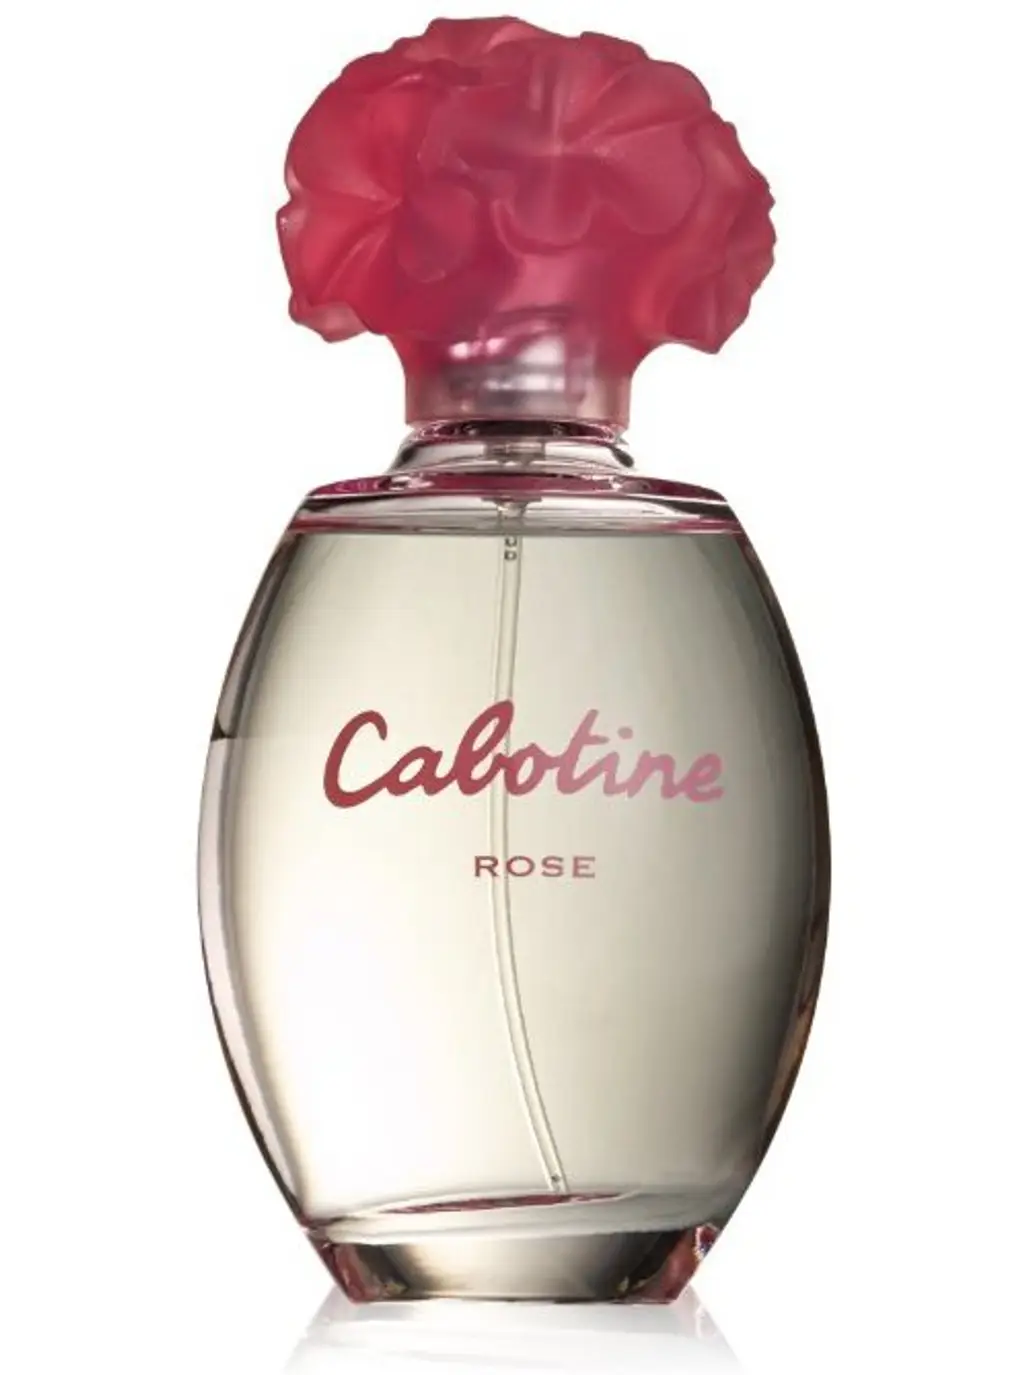 Cabotine Rose - Parfums Gres for Women